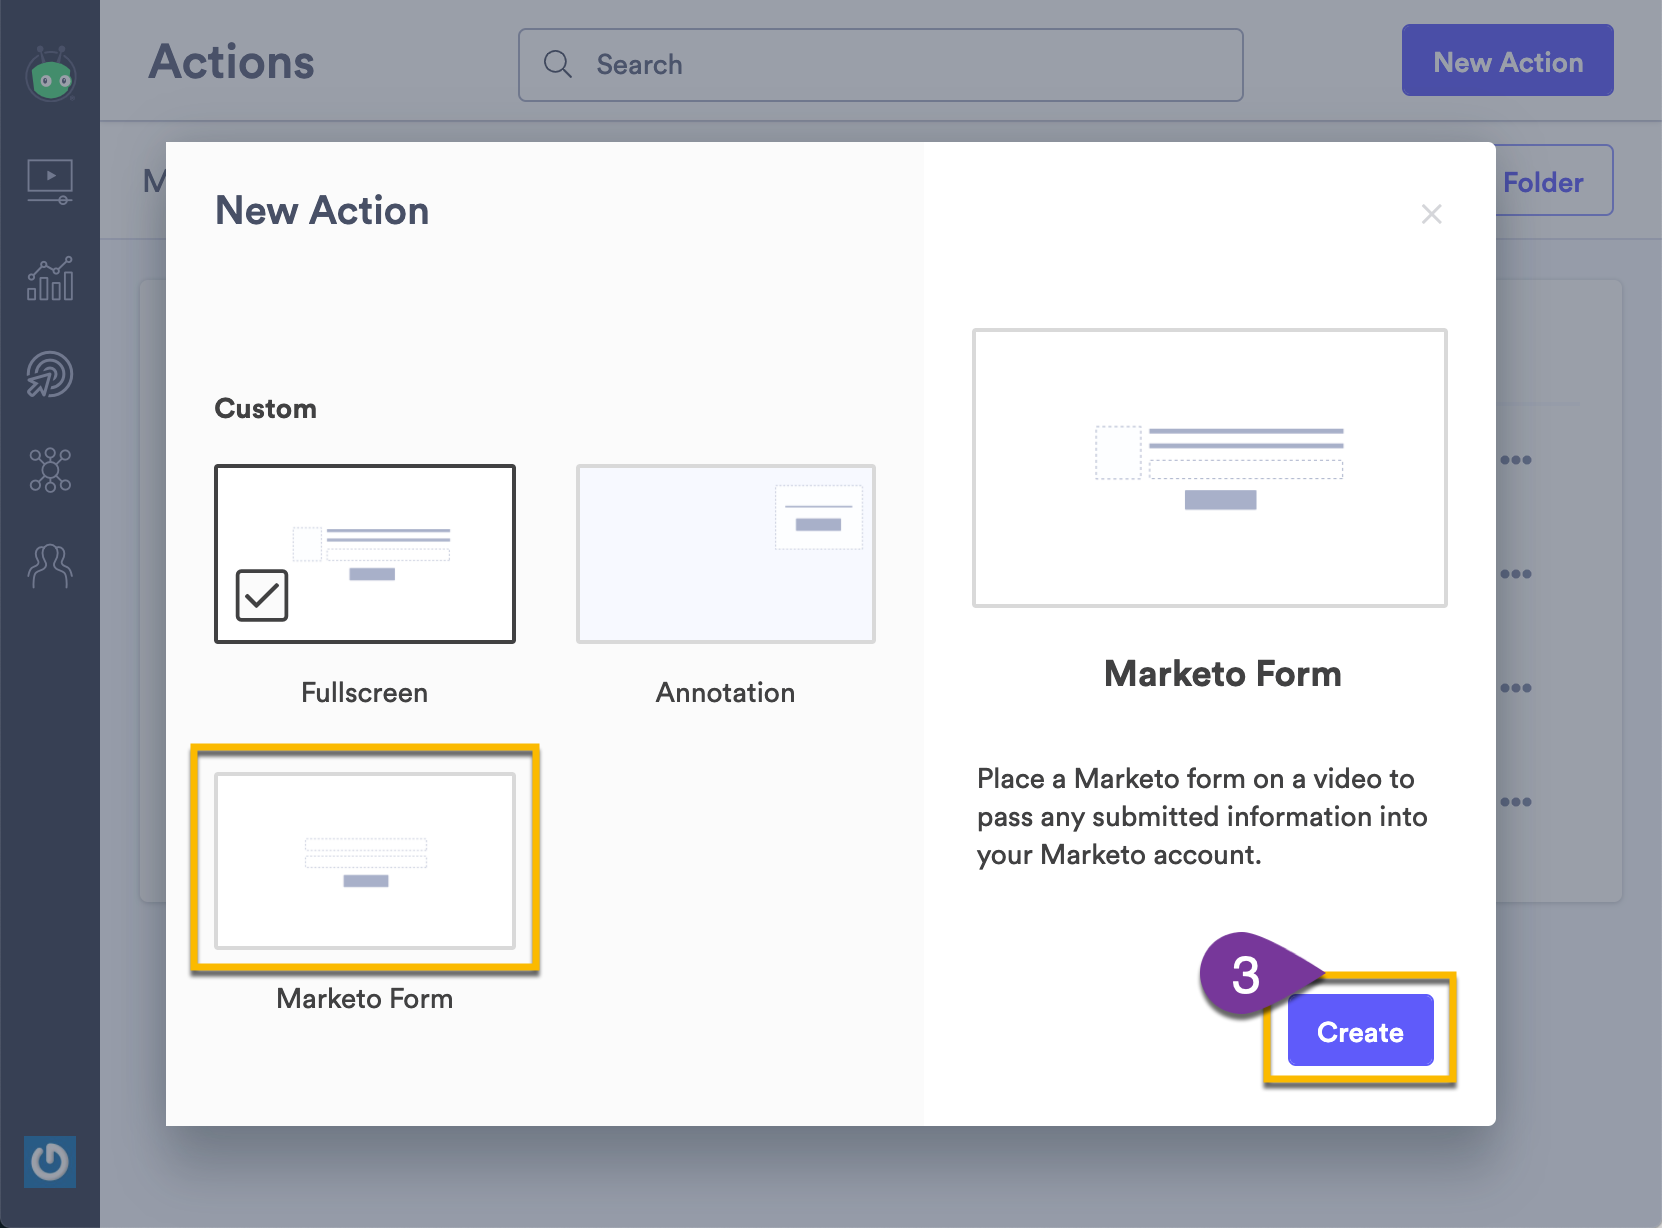 Selecting the option to create a Marketo form from the New Action menu